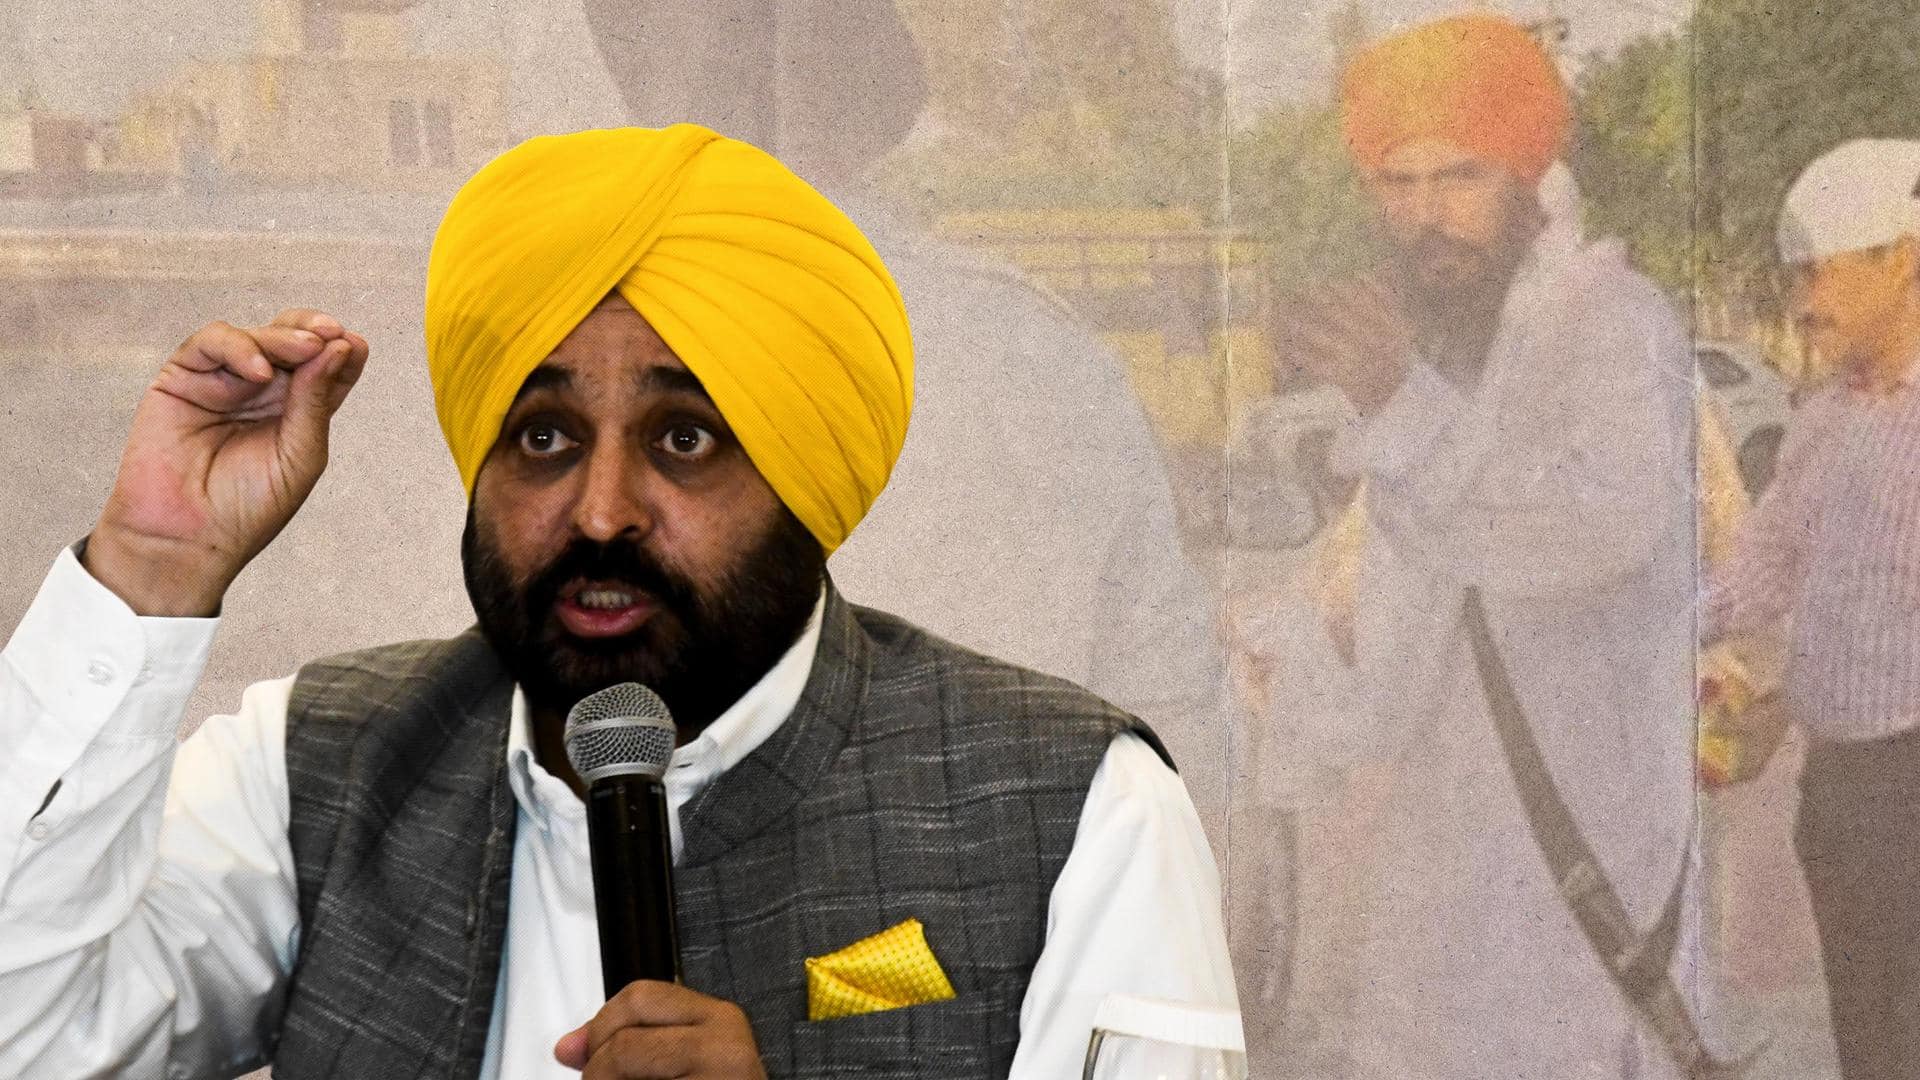 'Those breaking law will face action': CM Mann post-Amritpal's arrest